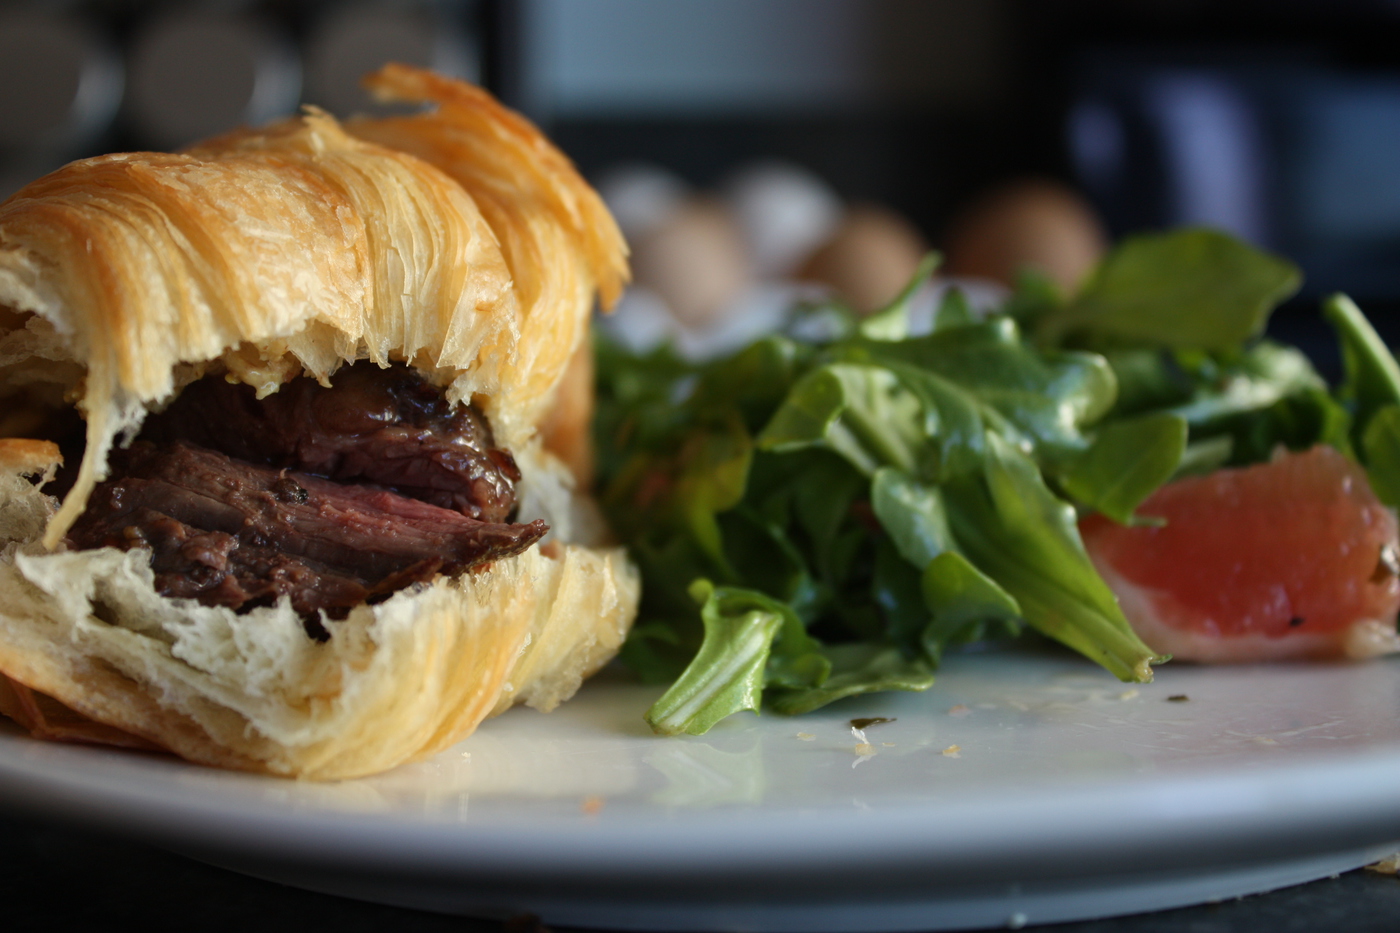 Croissant steak sandwich made with a buttery French croissant and hanger steak